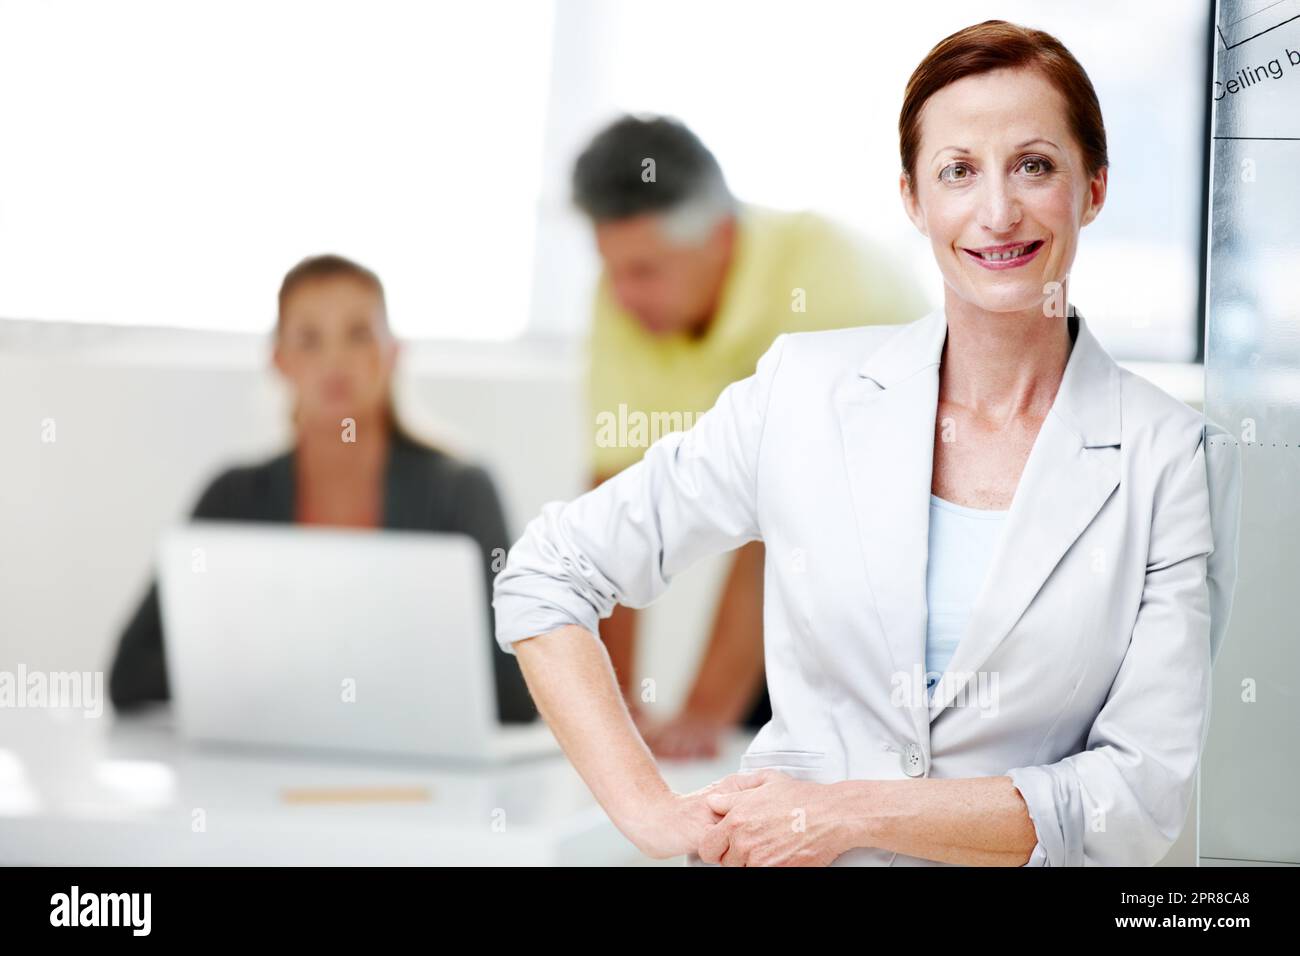 Shes leading this firm to new heights. A mature female architect standing confidently with her colleagues in the background. Stock Photo